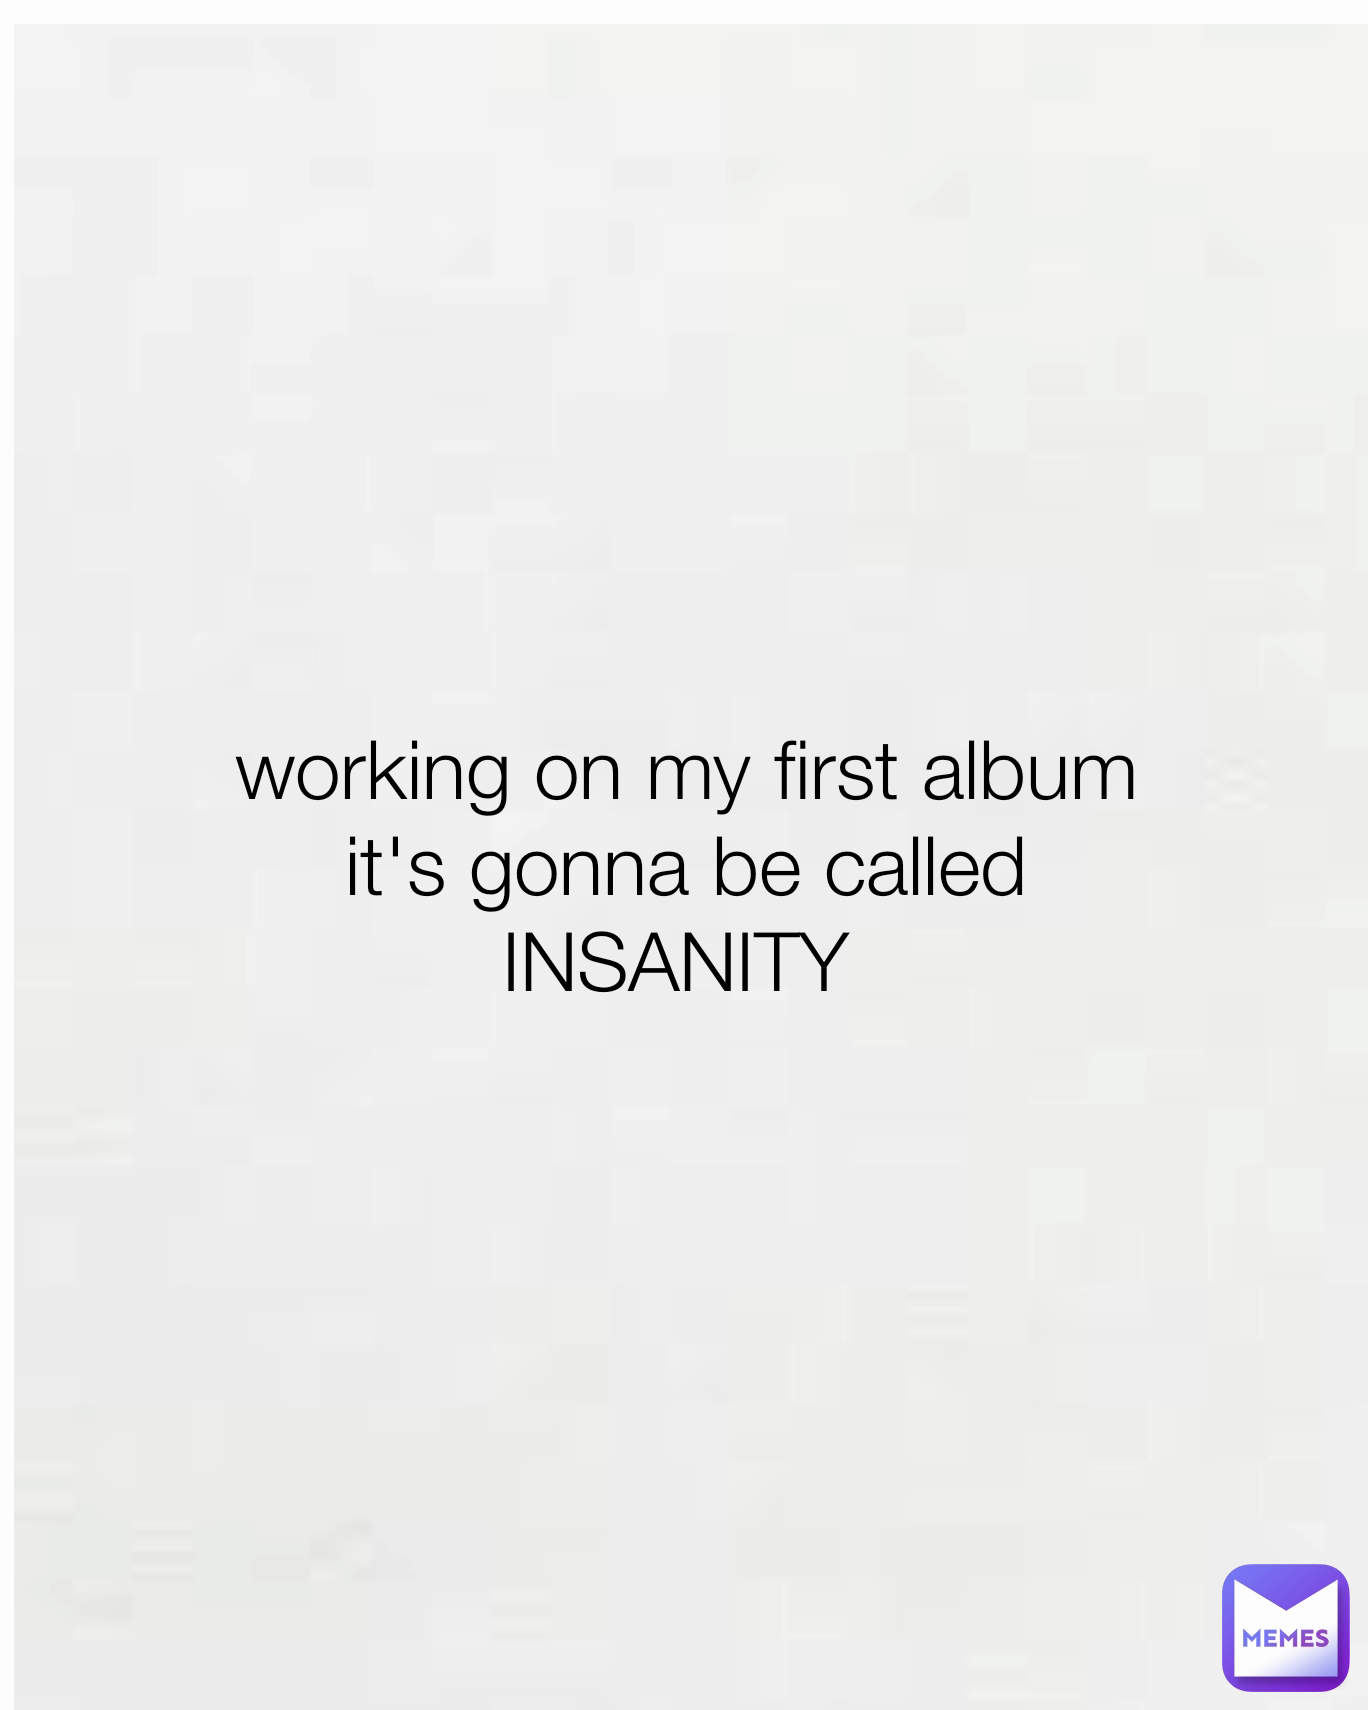 working on my first album
it's gonna be called
INSANITY 